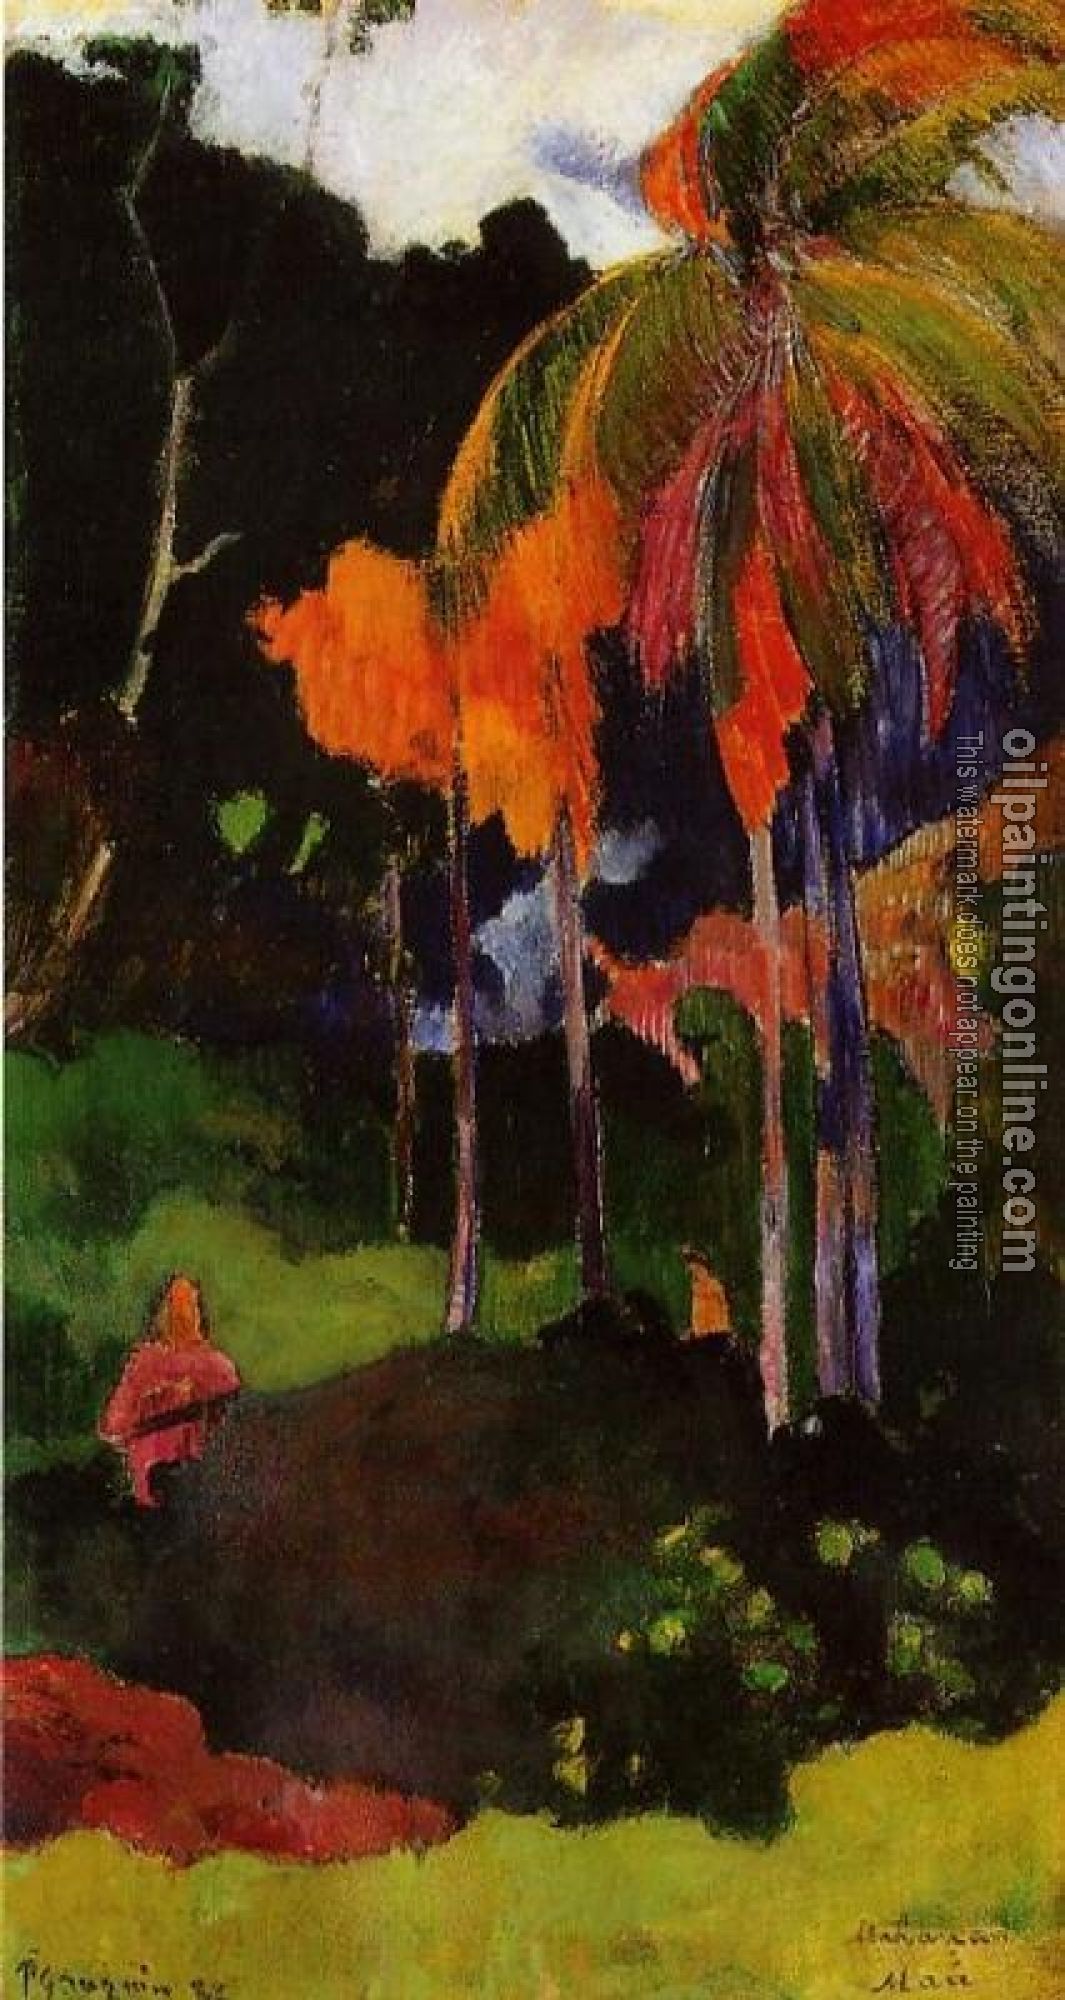 Gauguin, Paul - The Moment of Truth